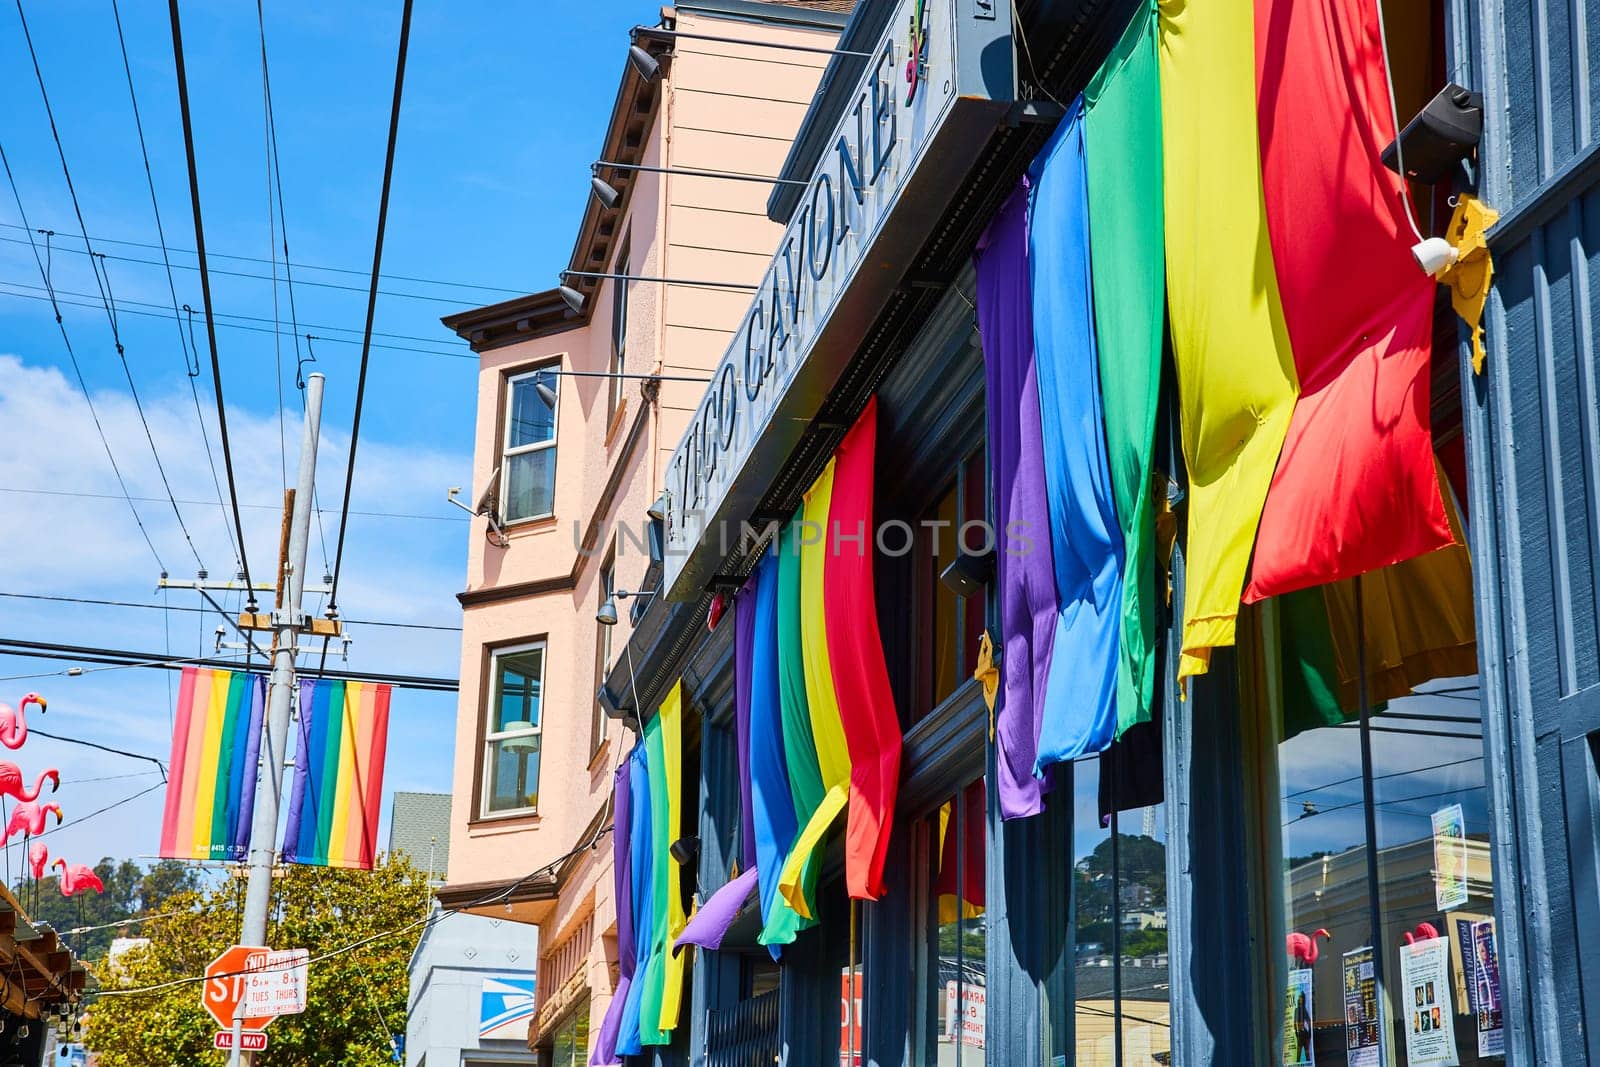 Image of Rainbow banners on Vico Cavone building with blue sky in San Francisco California